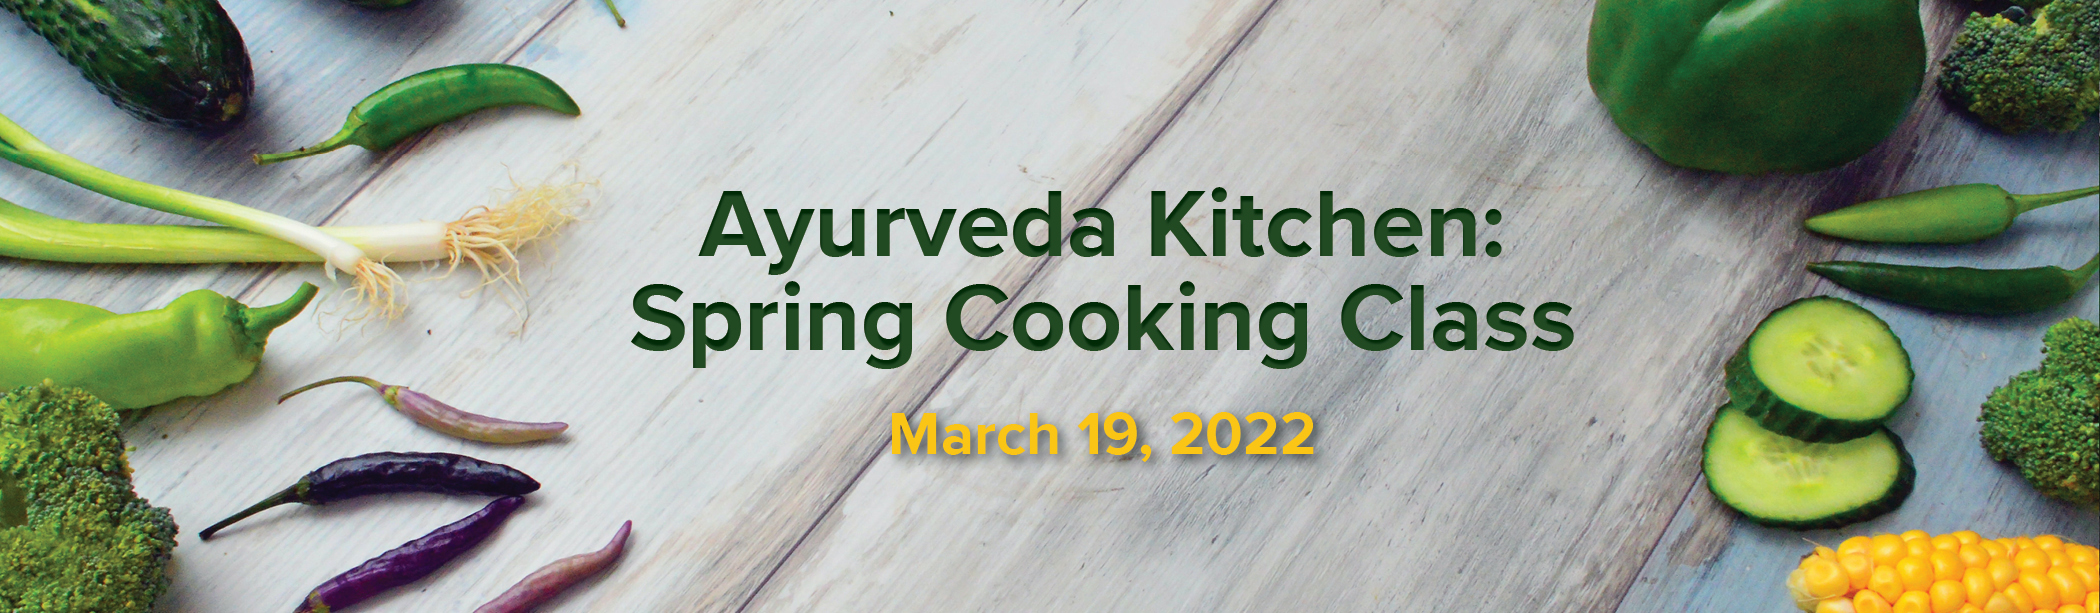 Spring Ayurveda Cooking Class with Sage & Fettle Ayurveda and Angelina Fox March 19, 2022 Event Image